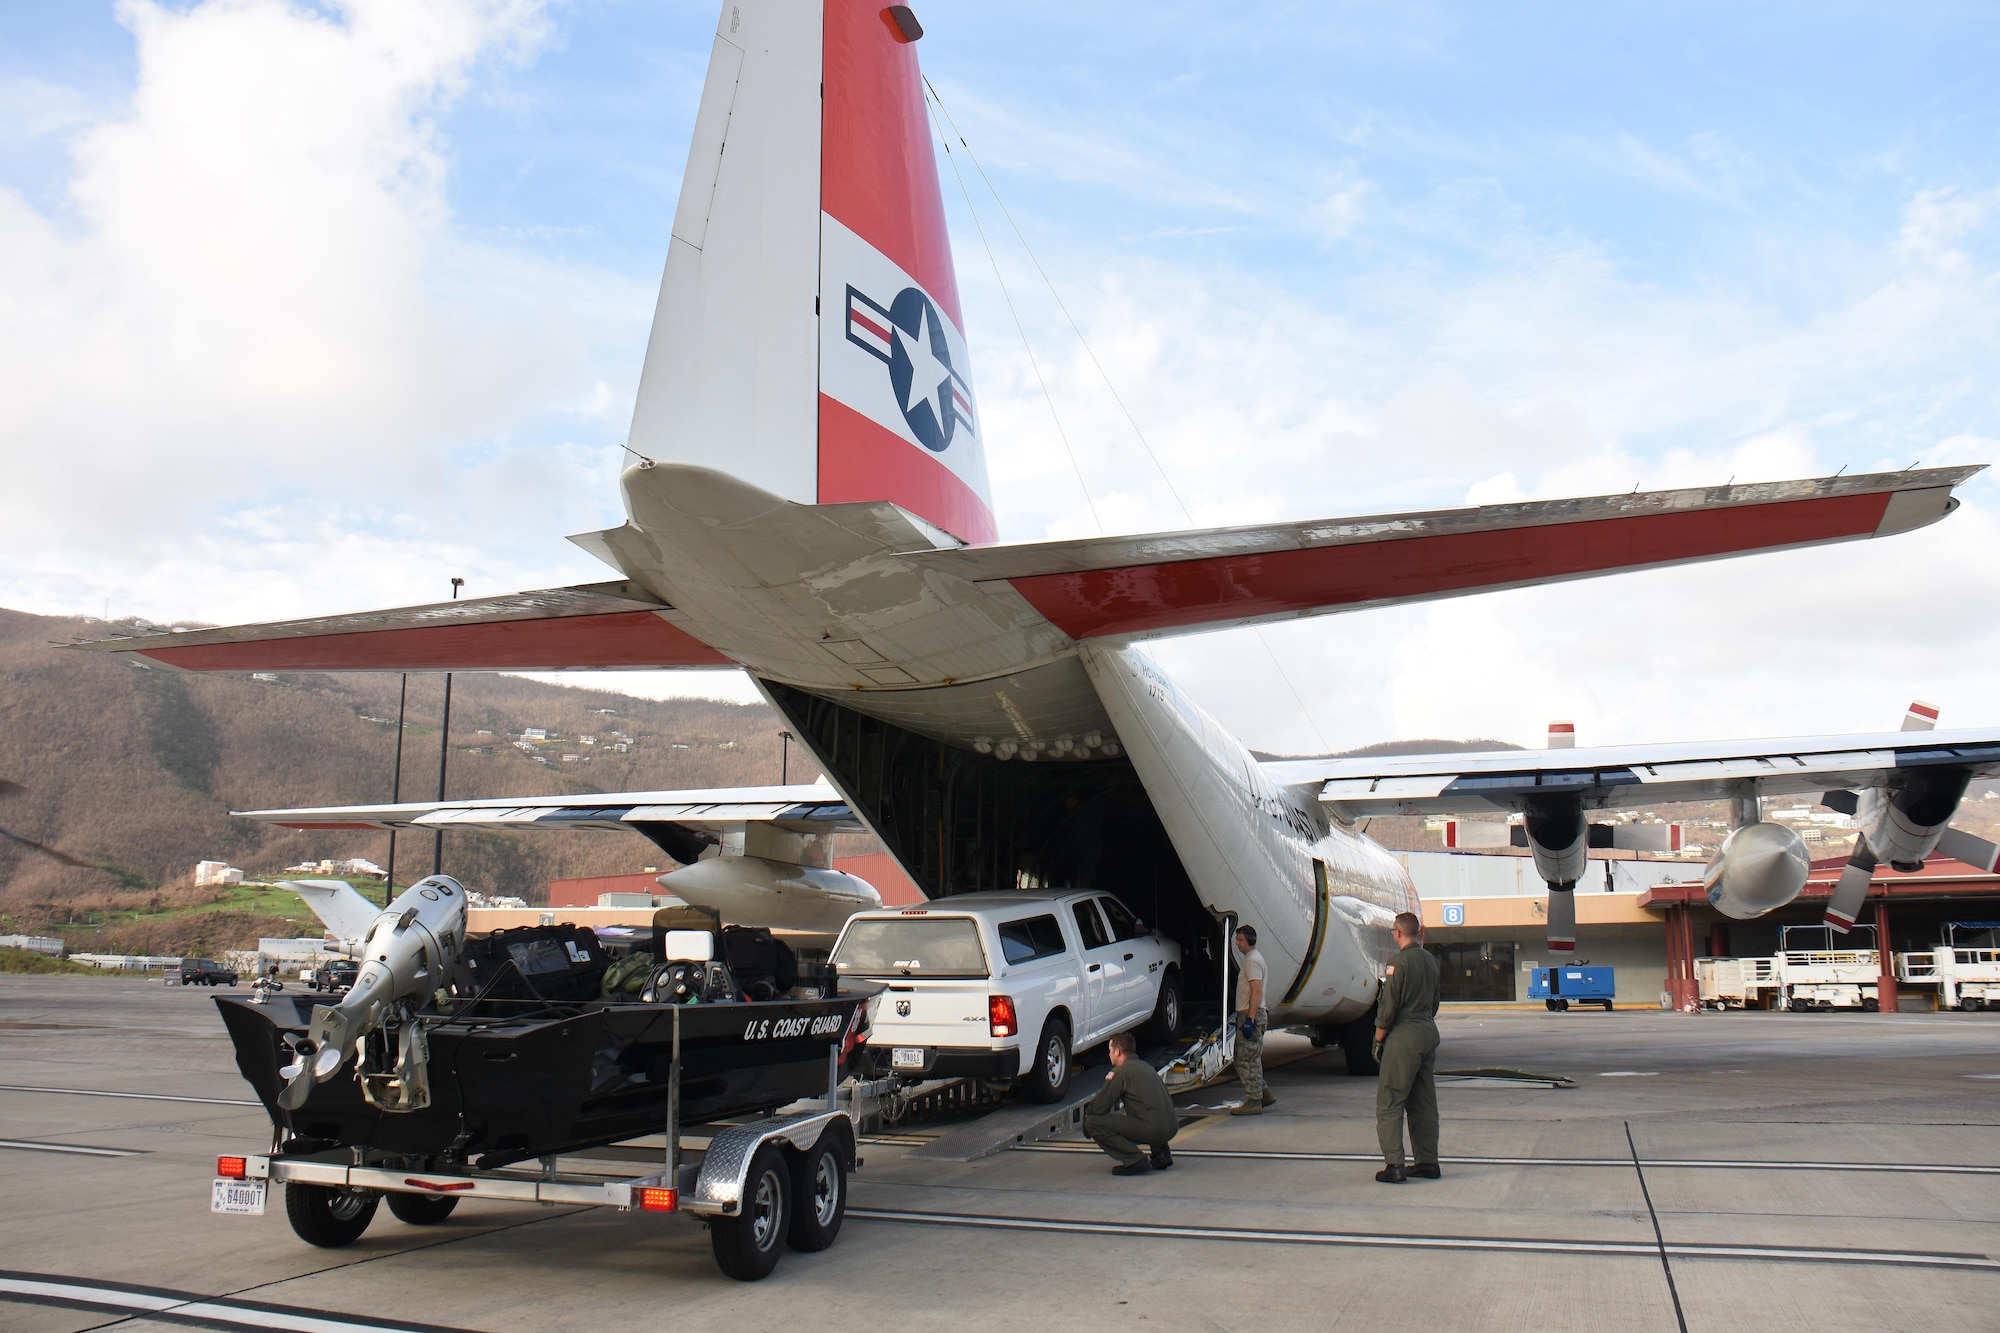 Air transportation specialists with the Air National Guard's 133rd Airlift Wing in Minneapolis, Minnesota assist with the download of cargo from a U.S. Coast Guard C-130H Hercules at Cyril E. King Airport in St. Thomas, U.S. Virgin Islands, Sept. 15, 2017. 133rd AW personnel joined Airmen assigned to the 146th Airlift Control Flight in Channel Islands, Florida and the 161st Air Refueling Wing in Phoenix, Arizona to manage air operations at the storm damaged airport in St. Thomas in the wake of Hurricane Irma. (U.S. Air National Guard photo by Master Sgt. Paul Gorman)